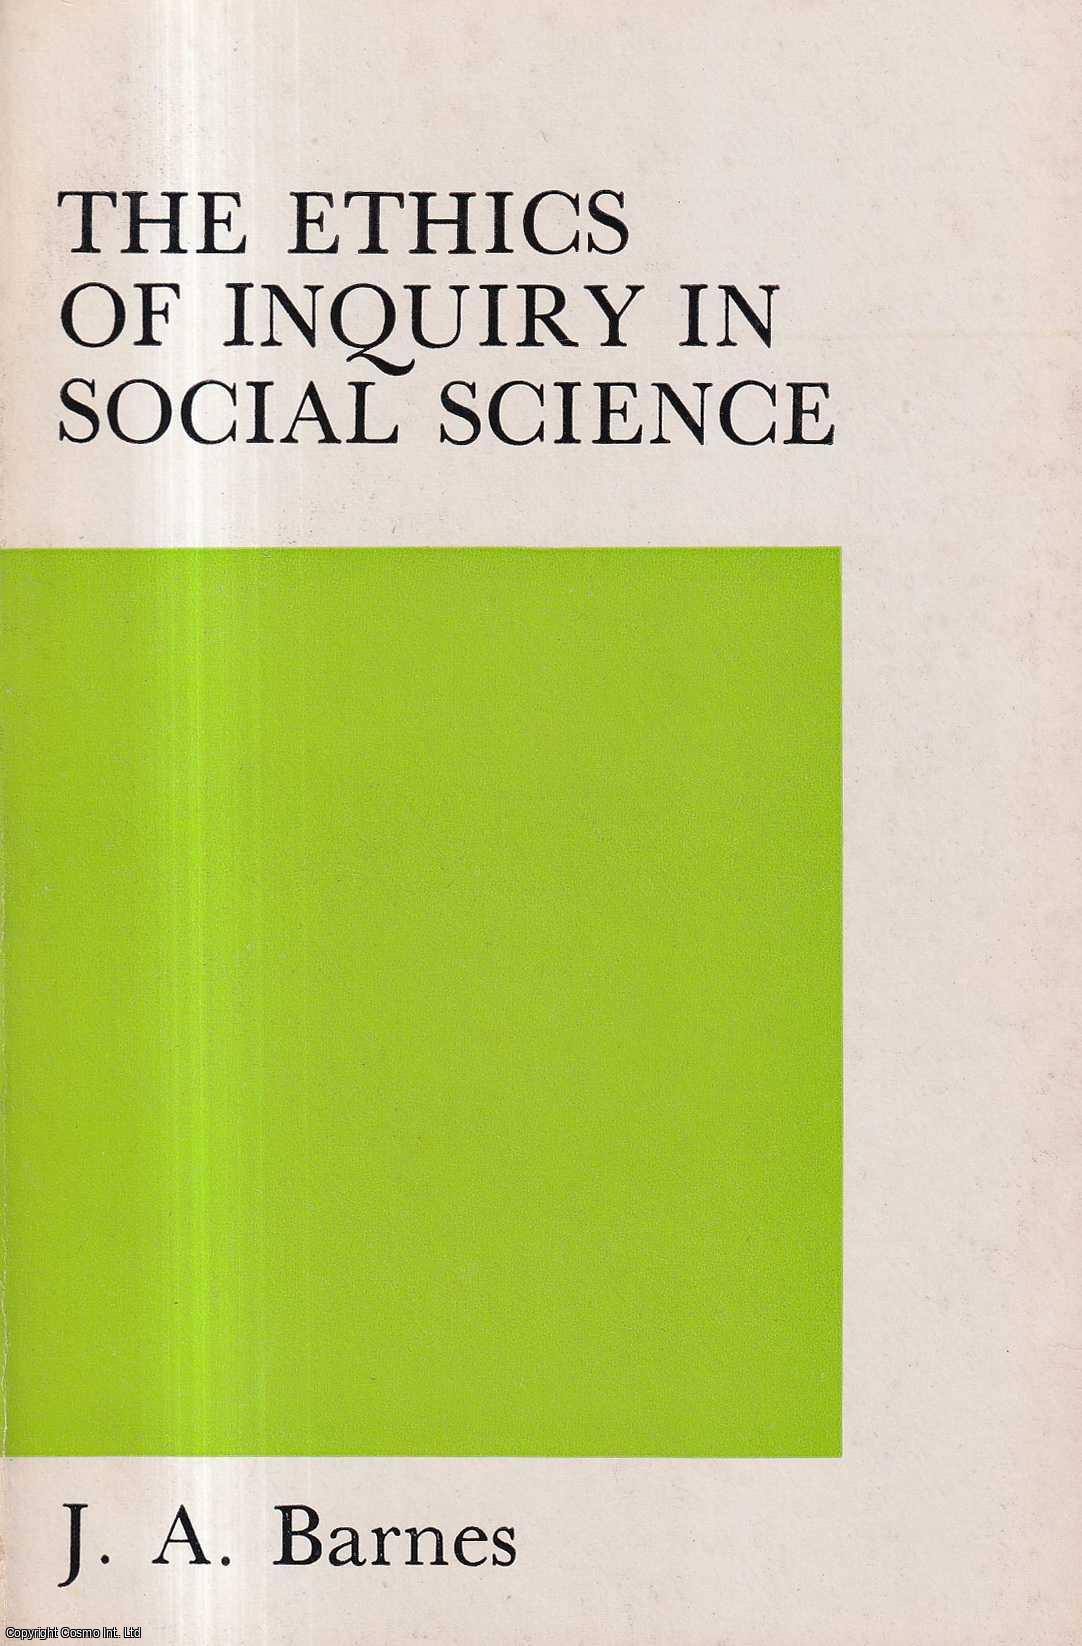 J.A. Barnes - The Ethics of Inquiry in Social Science. Three Lectures.